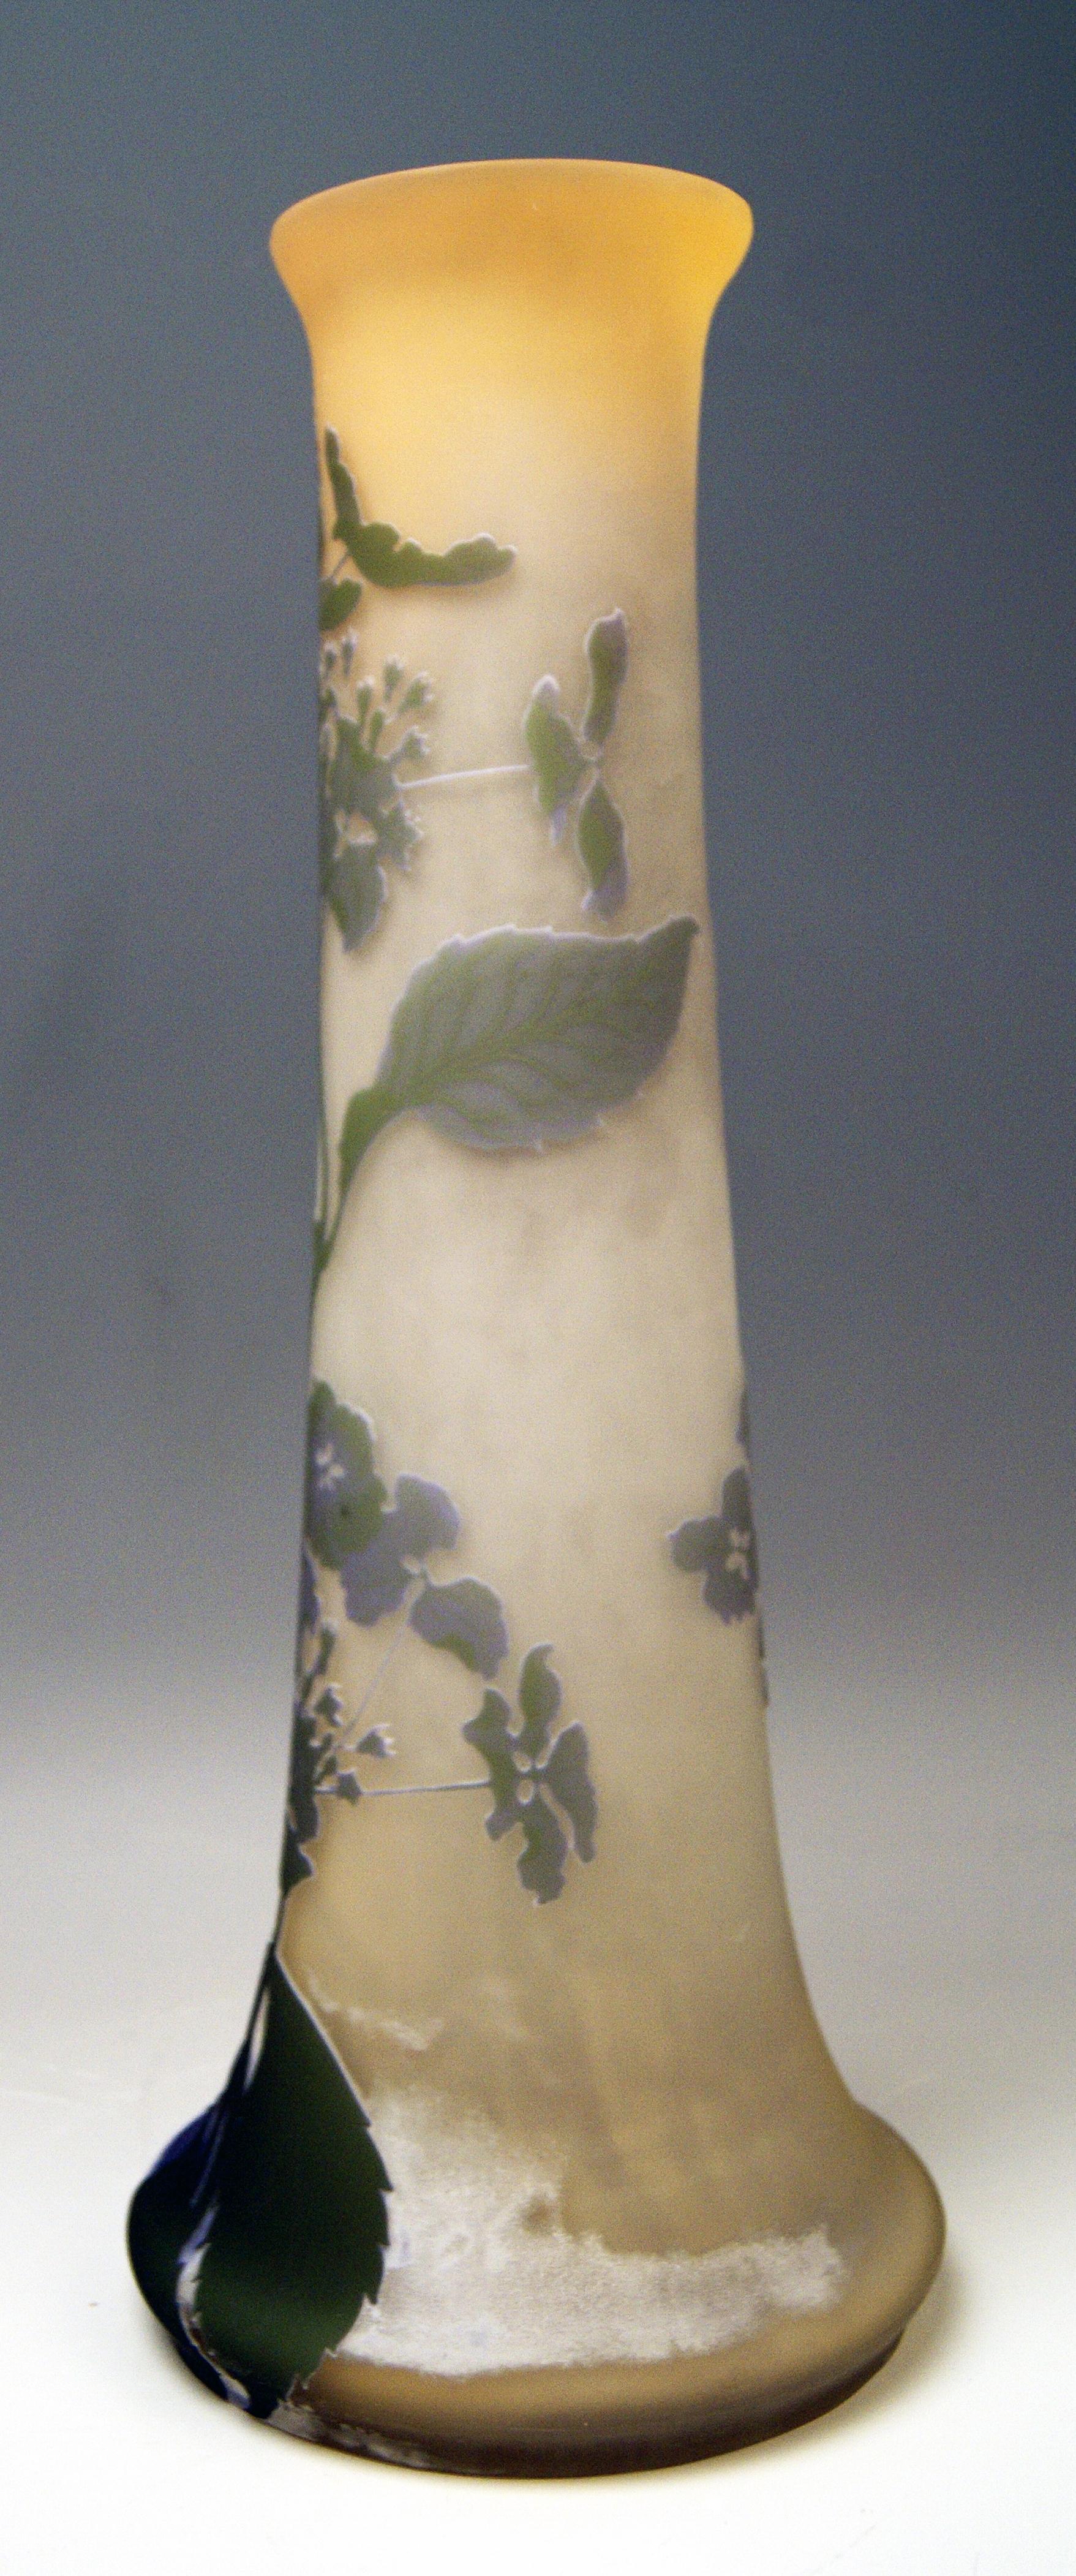 Art Nouveau Tall Stalky Vase by Gallé

Manufactory: 
Émile Gallé / France, Nancy, Lorraine
made circa 1904-1906

Technique of manufacture: Cameo glass and etched
(built up with different layers and cut back with acid to reveal beautiful